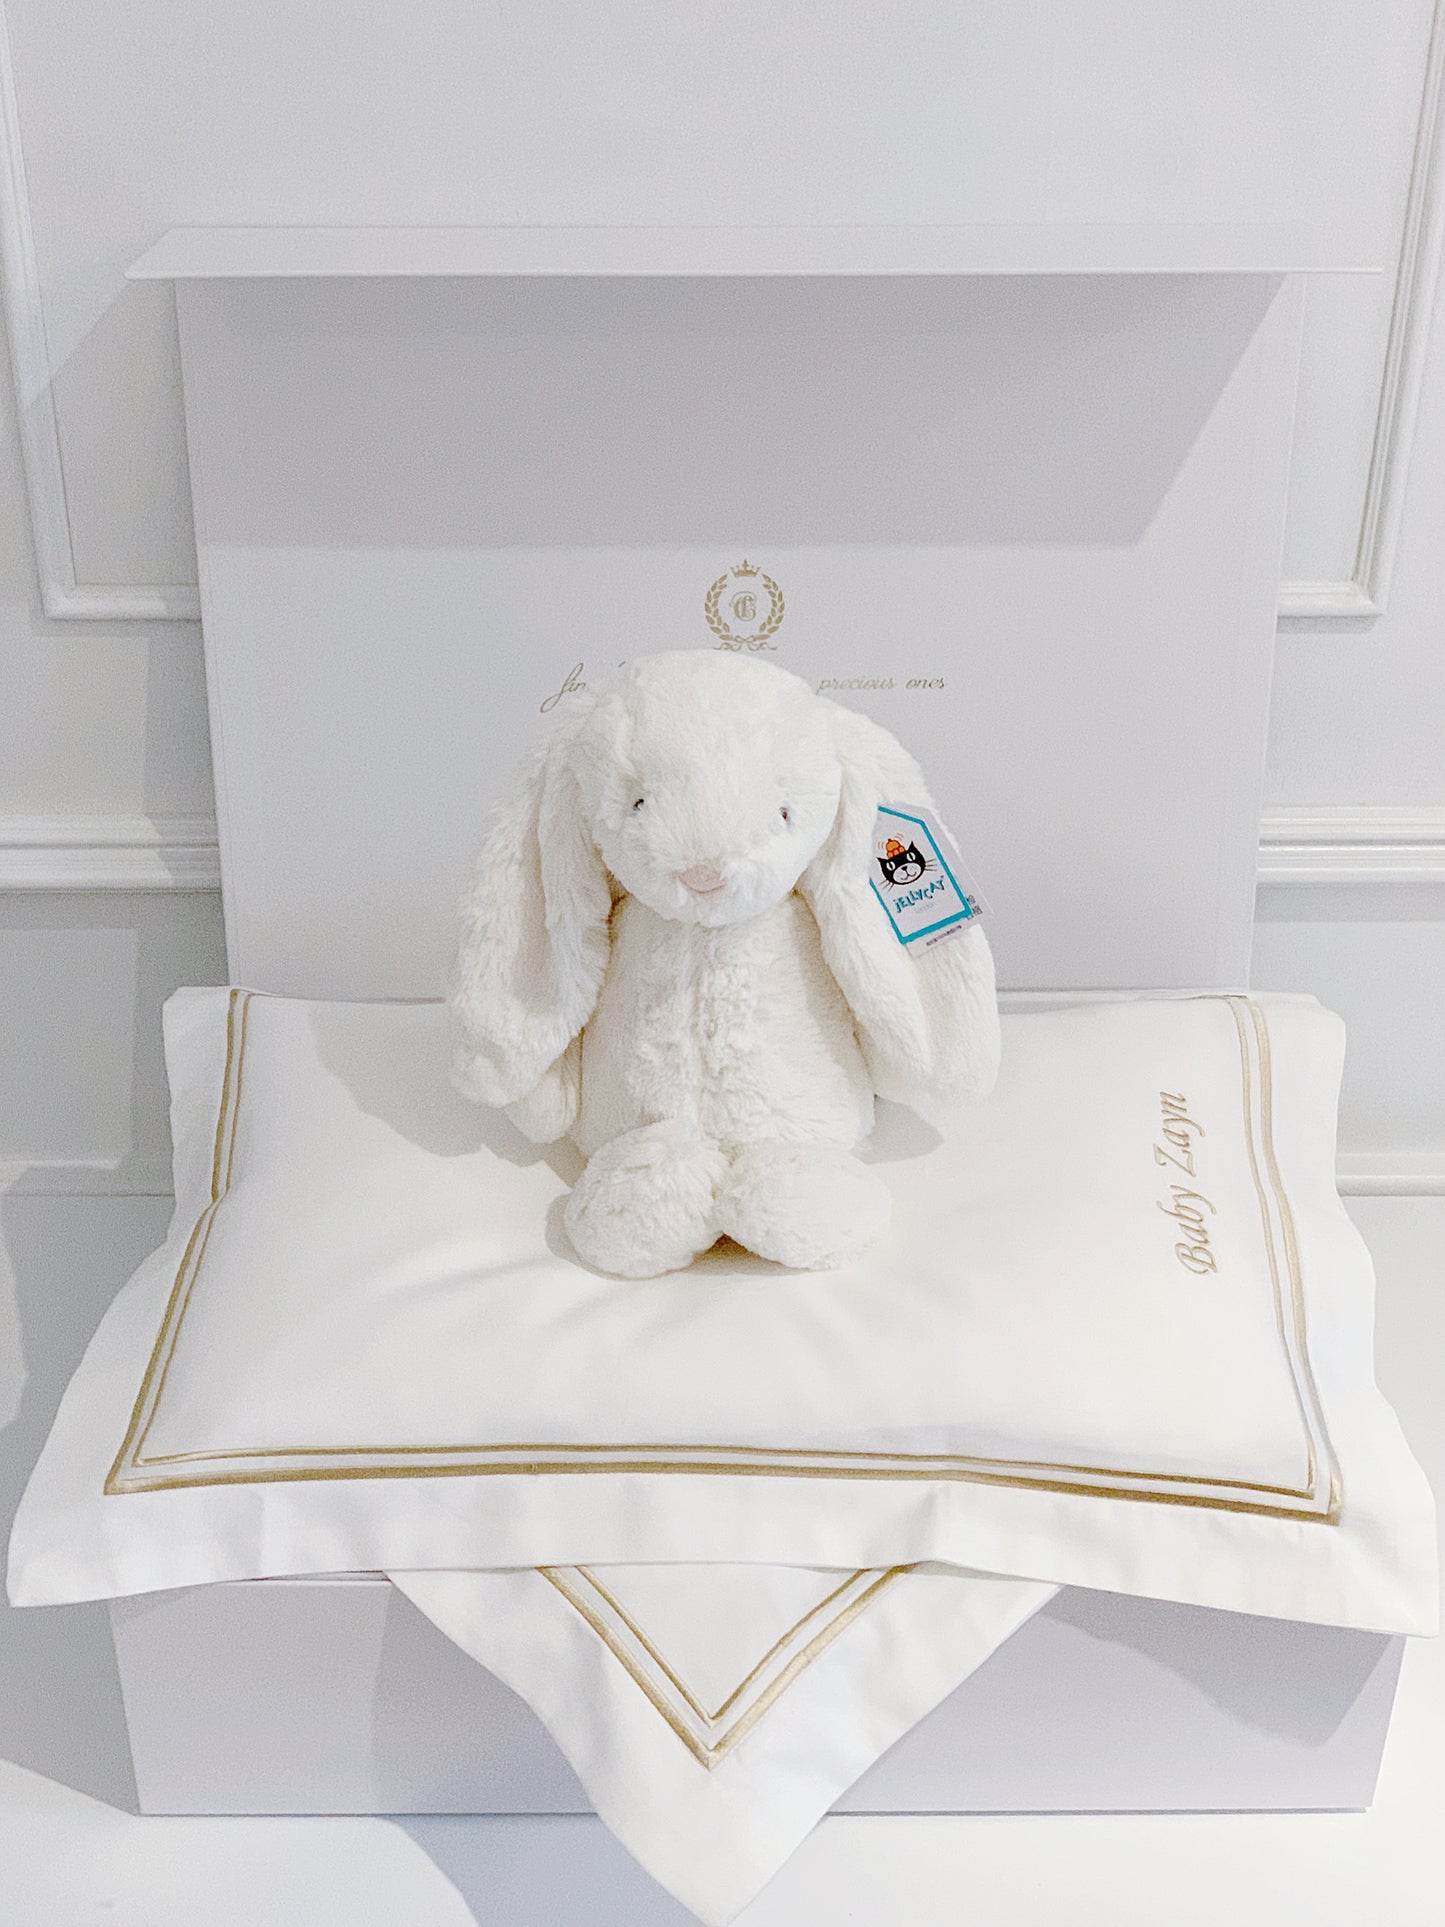 Jellycat Bunny Gift Sets for Baby